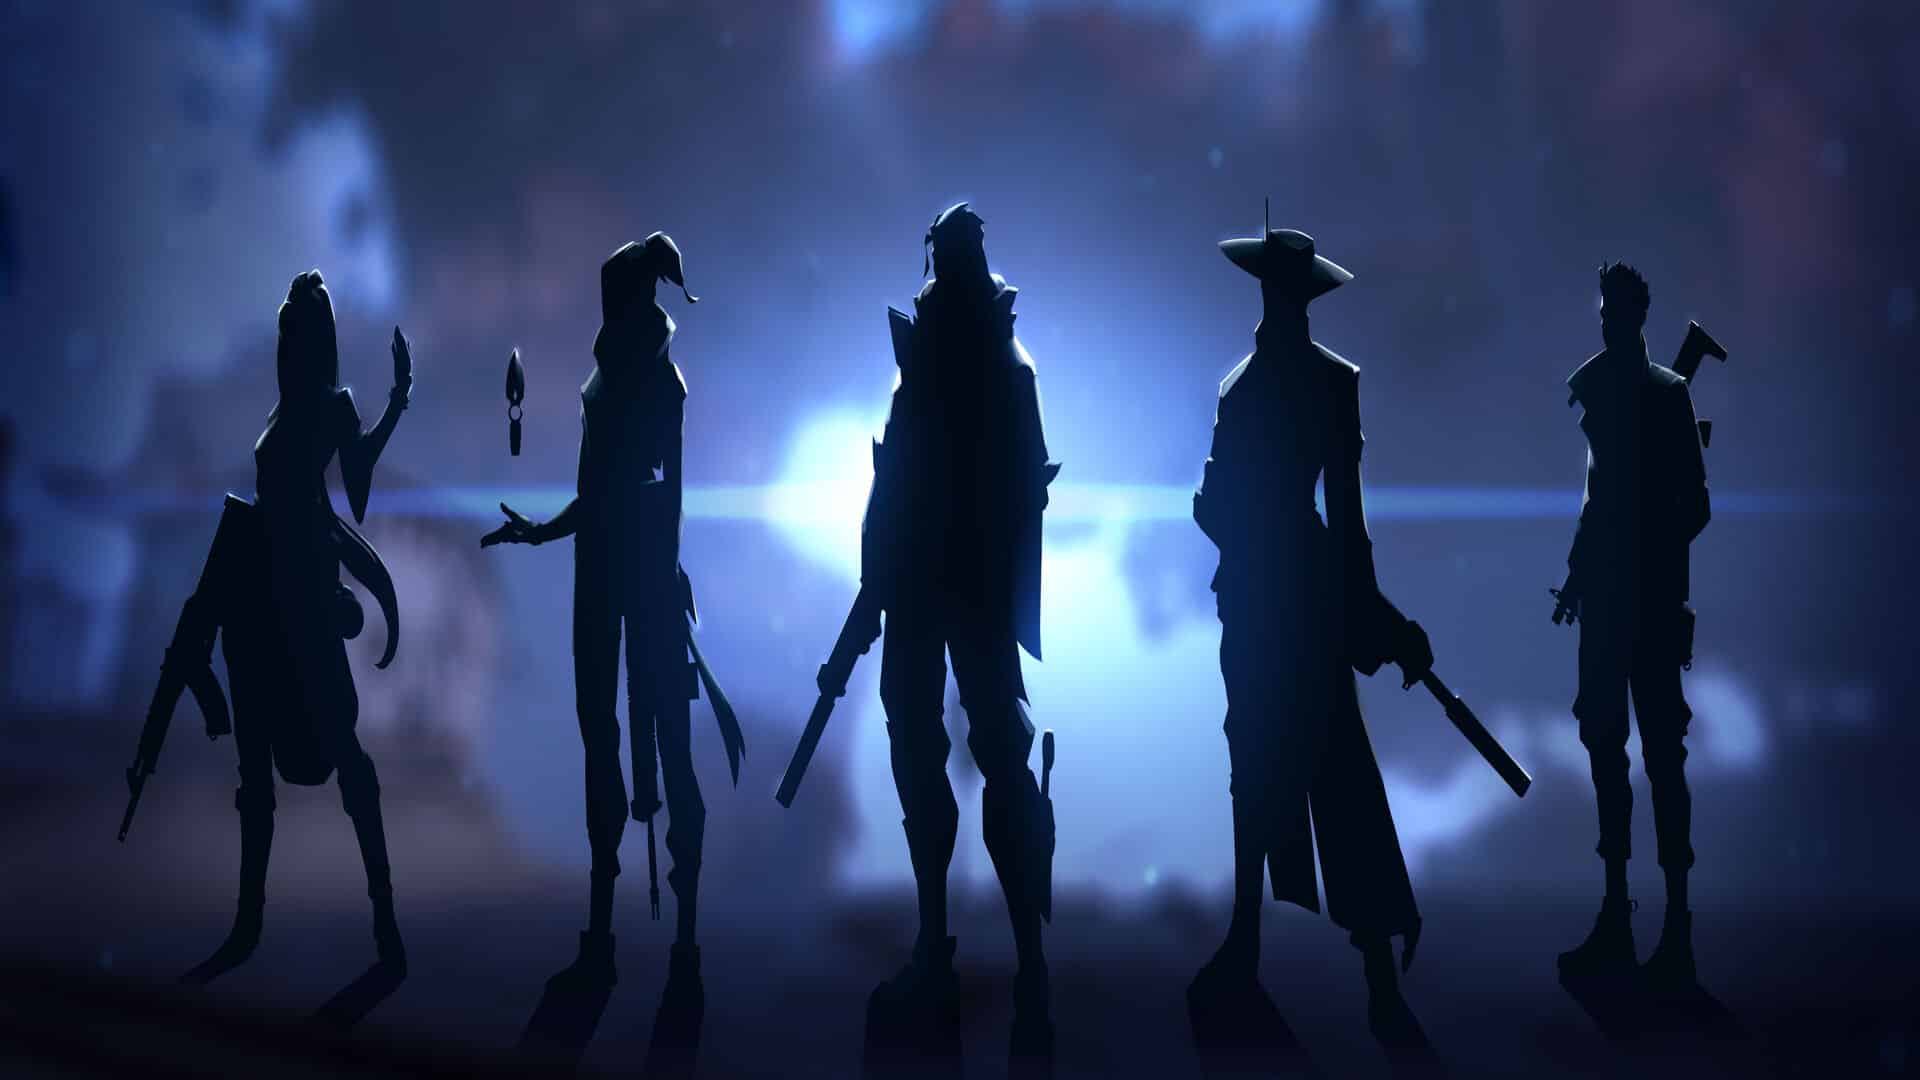 Image by xGhostx – The silhouette of Sage, Jett, Sova, Cypher, and Phoenix.